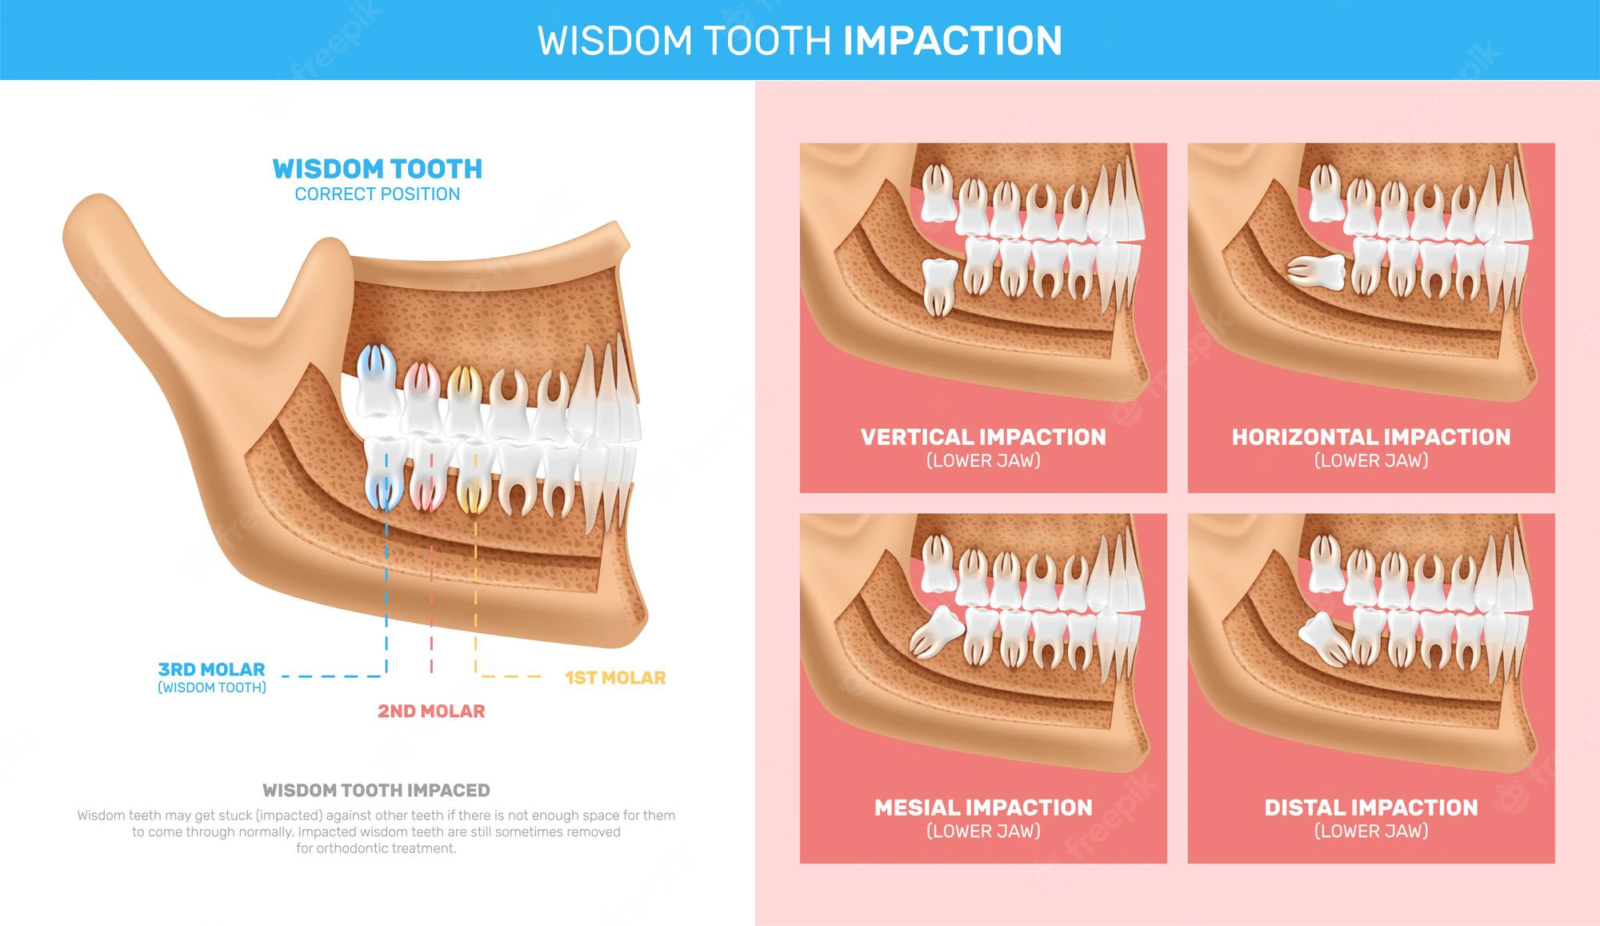 Diagram displaying different types of wisdom tooth impactions including a vertical impaction, a horizontal impcation, a mesial impaction, and a distal impcation